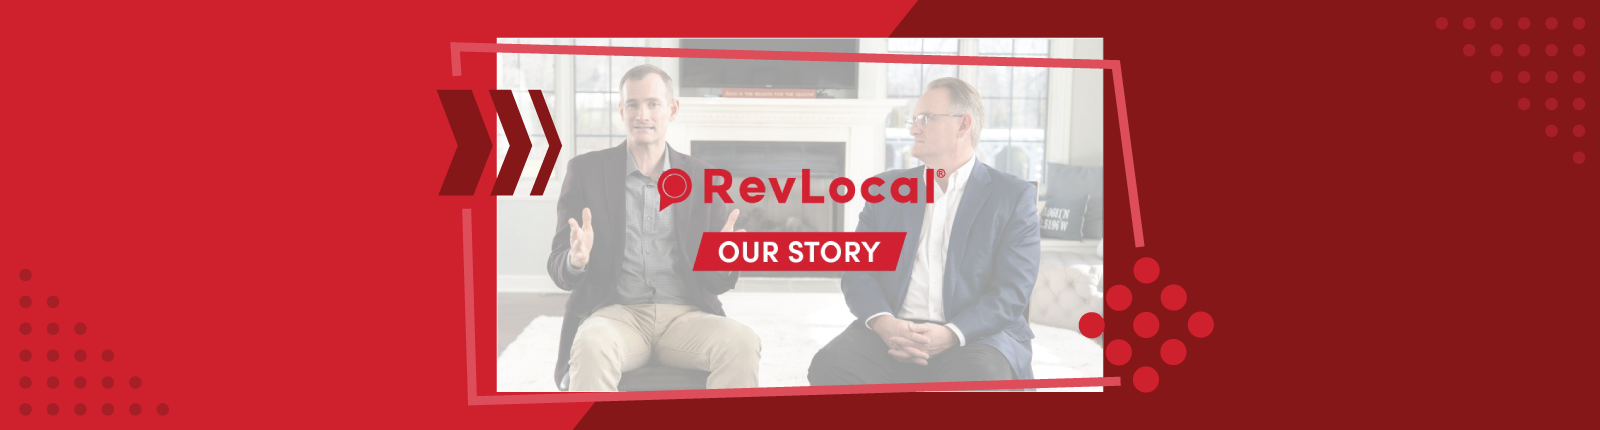 RevLocal Our Story Banner